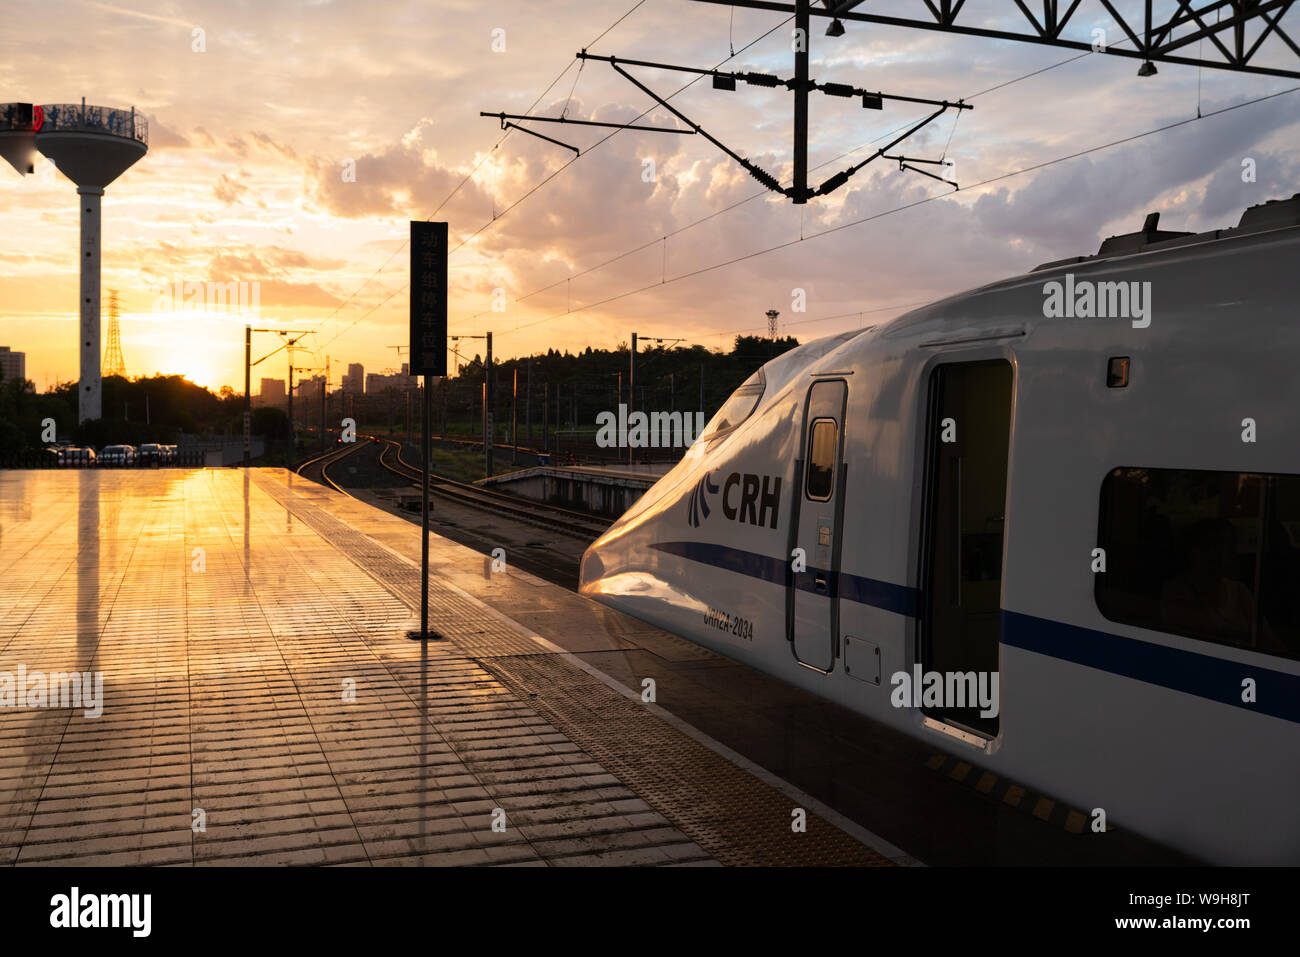 Yichang China, 11 August 2019 : Head of a CRH Chinese bullet train at sunset at Yichang station in China Stock Photo